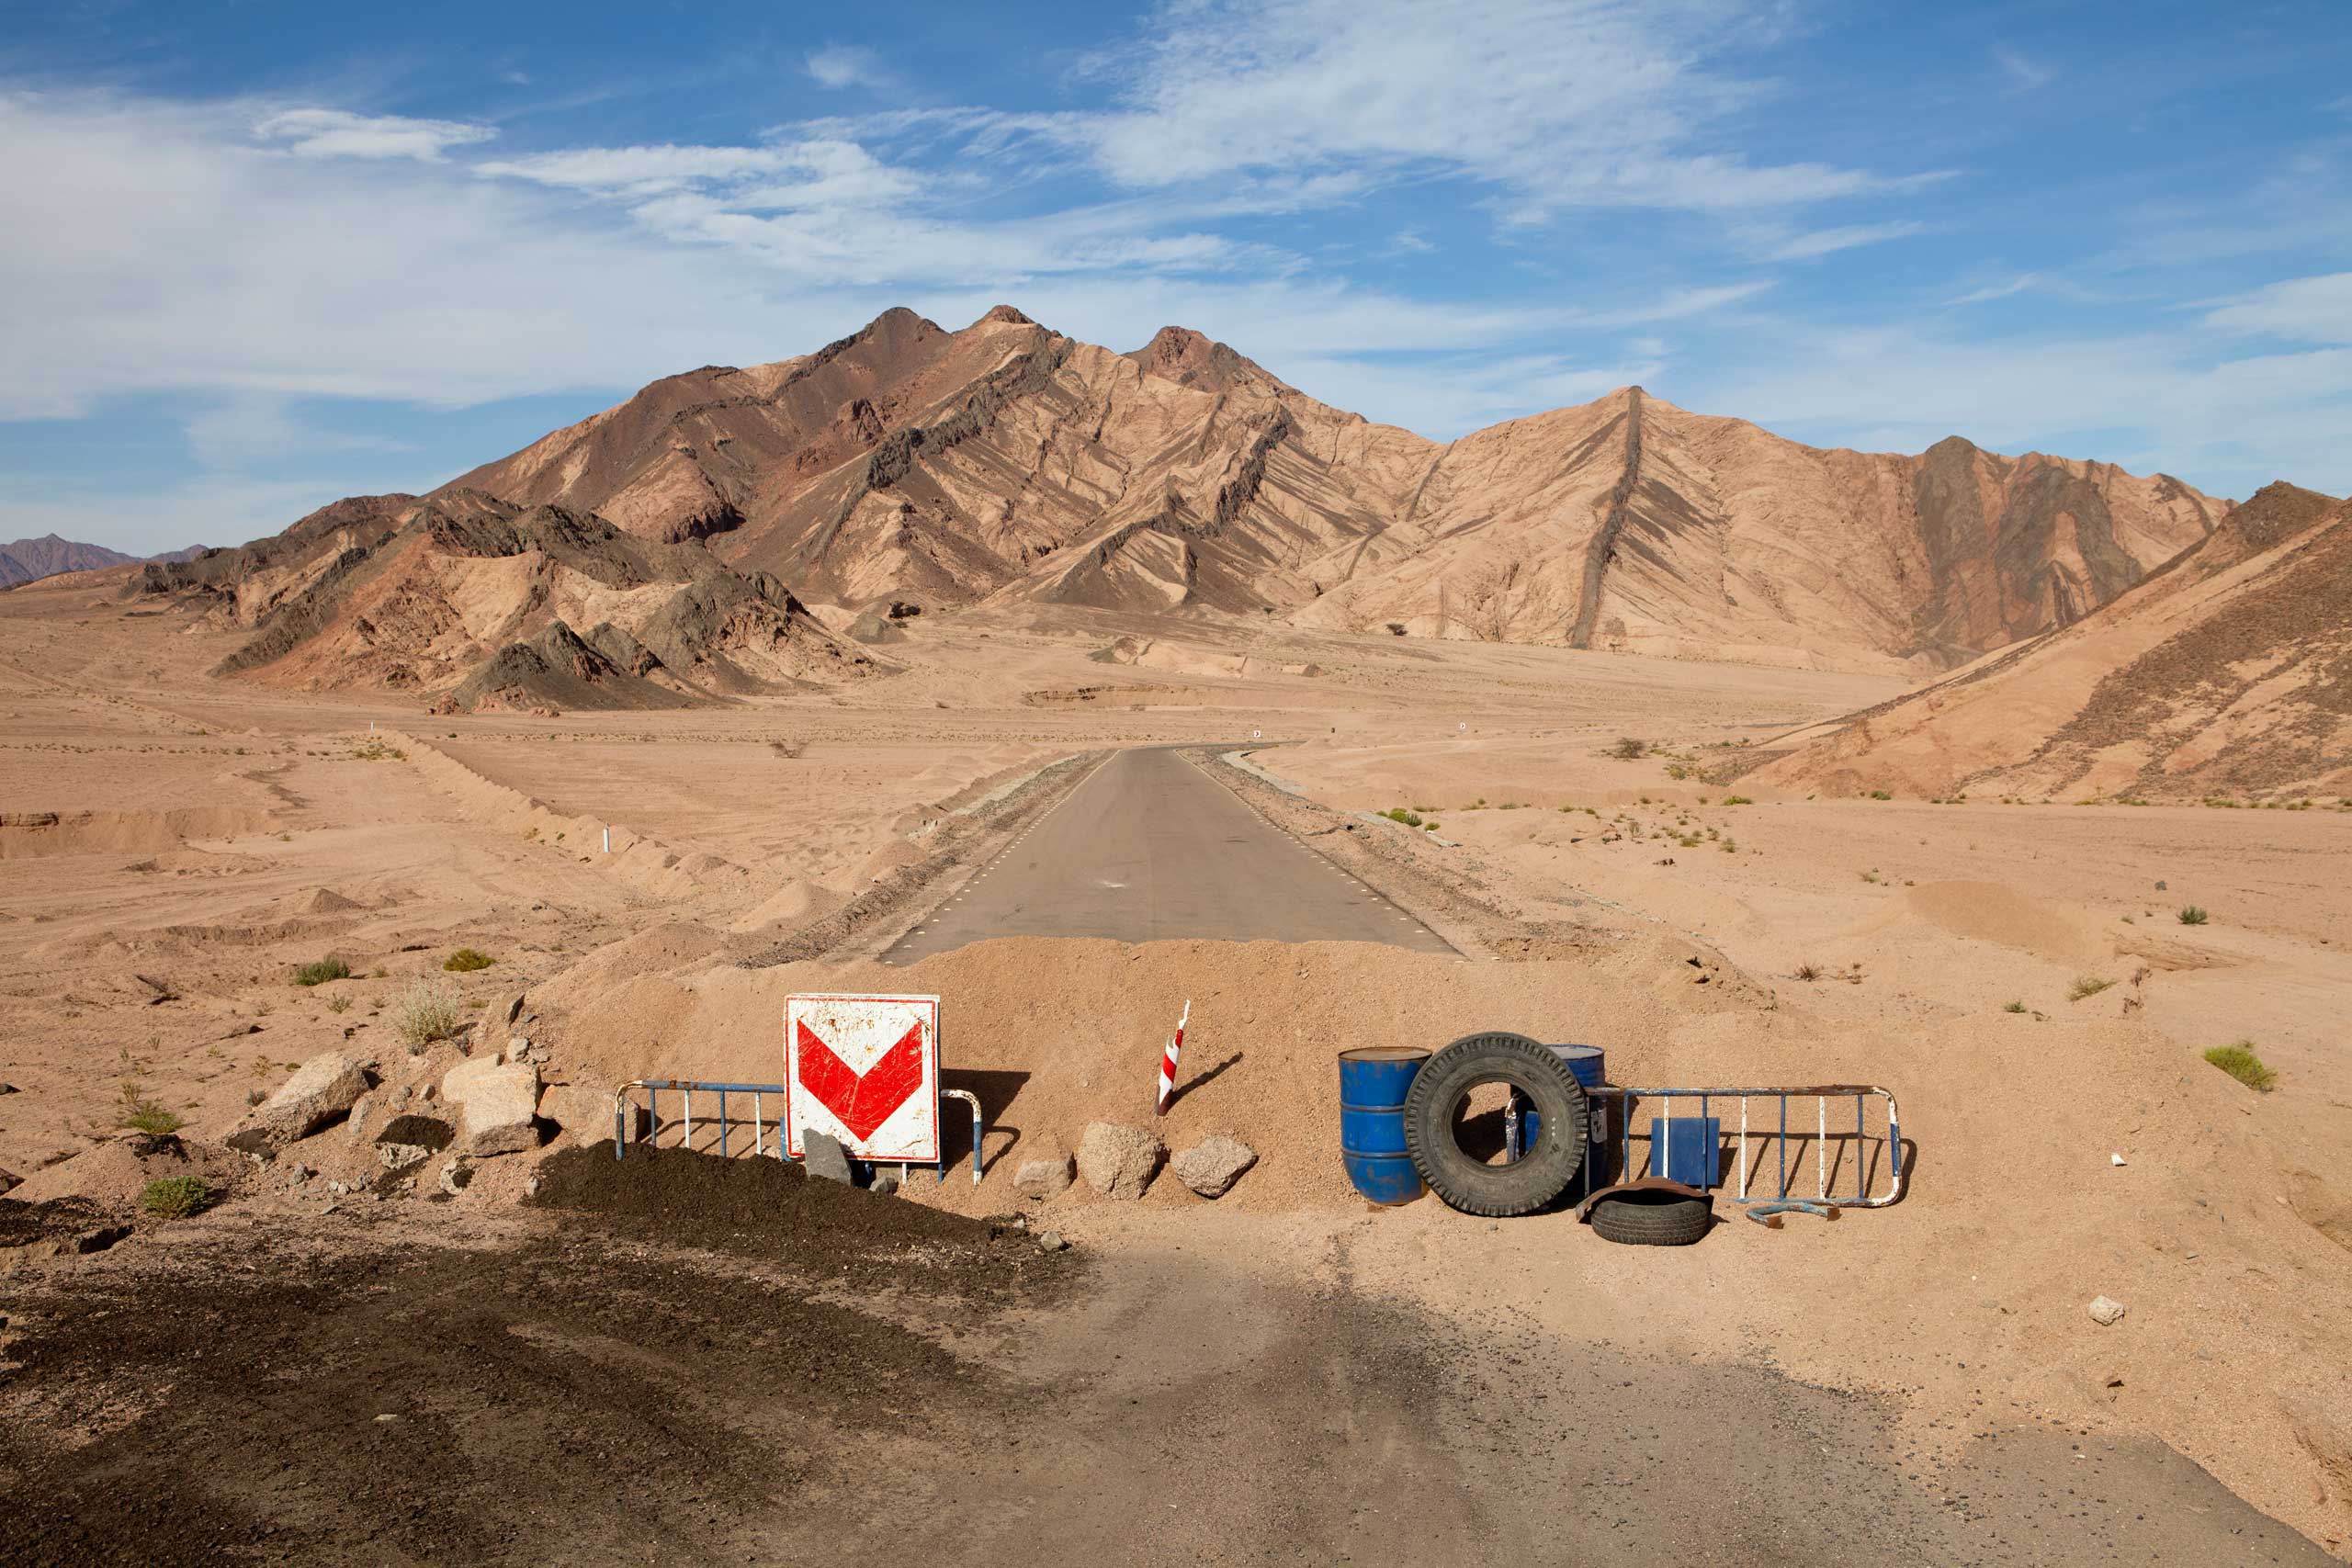 A blockade on road to Dahab, Sinai, March 2015.  The military blocks some roads in order to control traffic in the region.